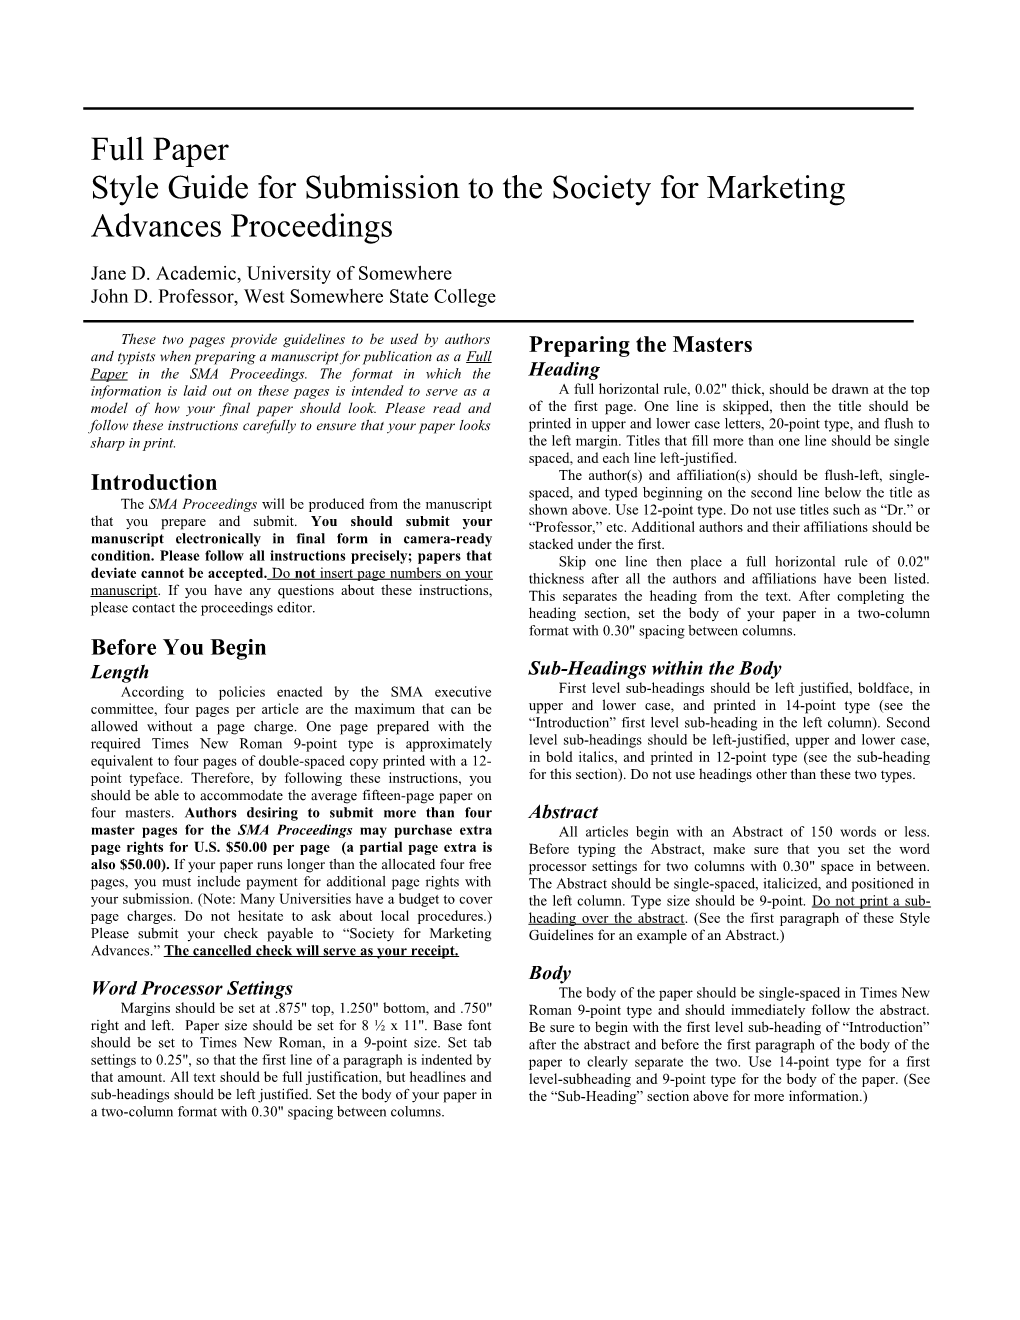 Style Guide for Submission to the Society for Marketing Advances Proceedings